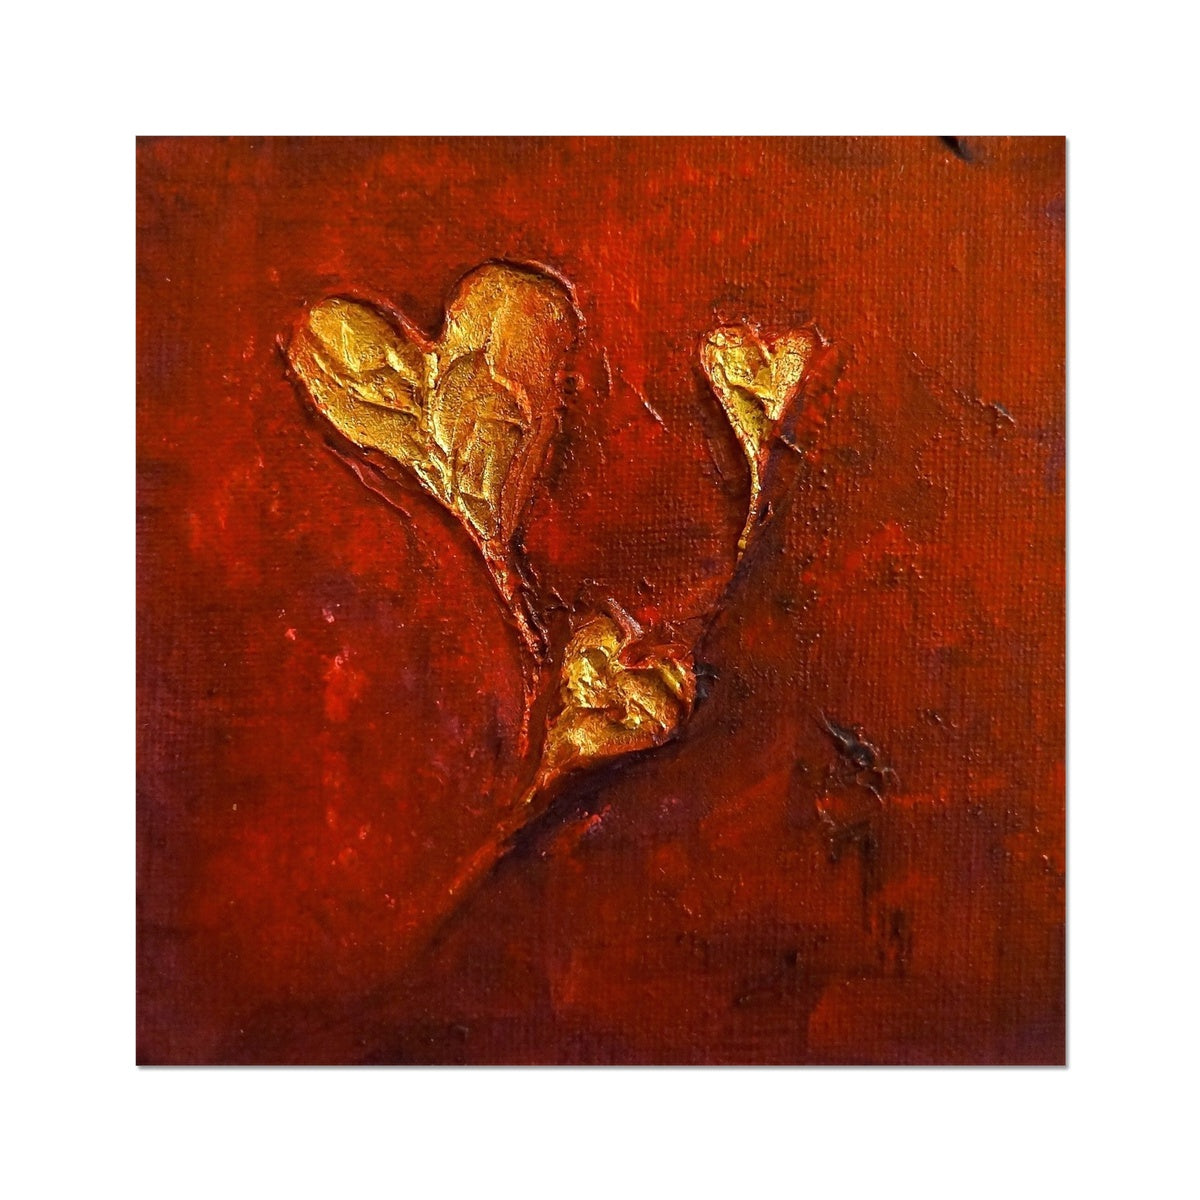 Hearts Abstract Painting | Artist Proof Collector Prints From Scotland-Artist Proof Collector Prints-Abstract & Impressionistic Art Gallery-20"x20"-Paintings, Prints, Homeware, Art Gifts From Scotland By Scottish Artist Kevin Hunter